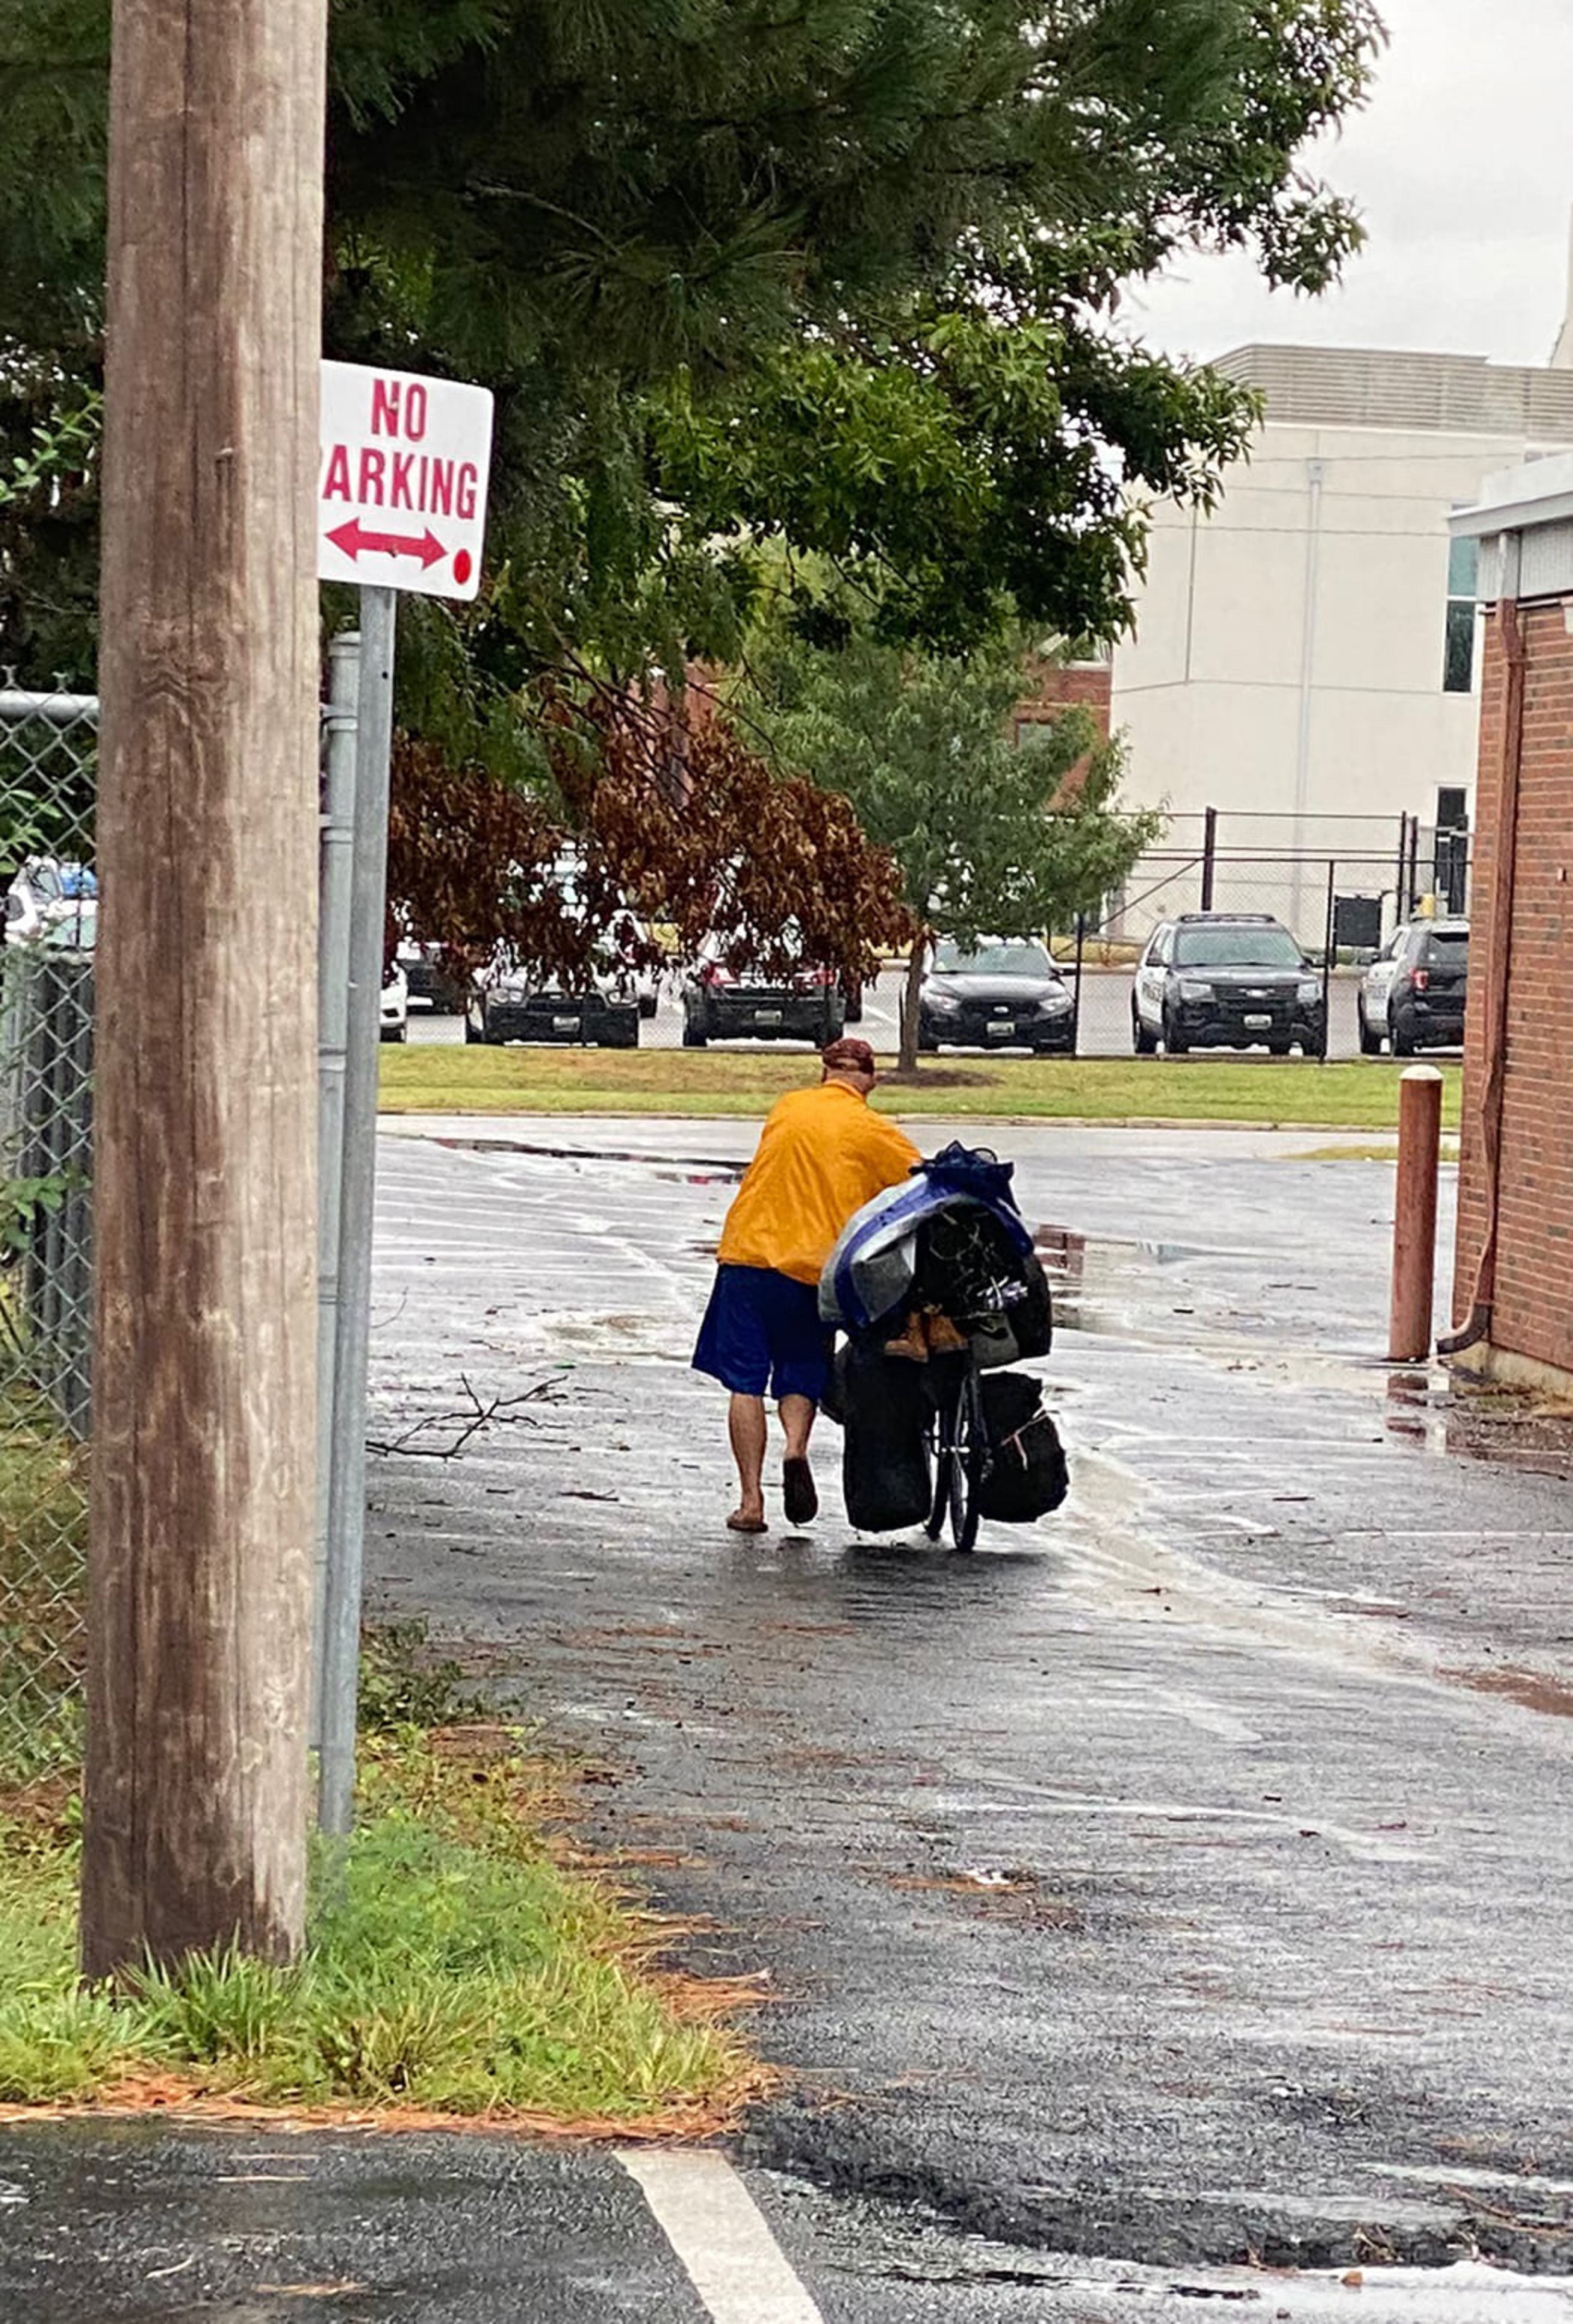 Photo of unsheltered man pushing a bike in the rain